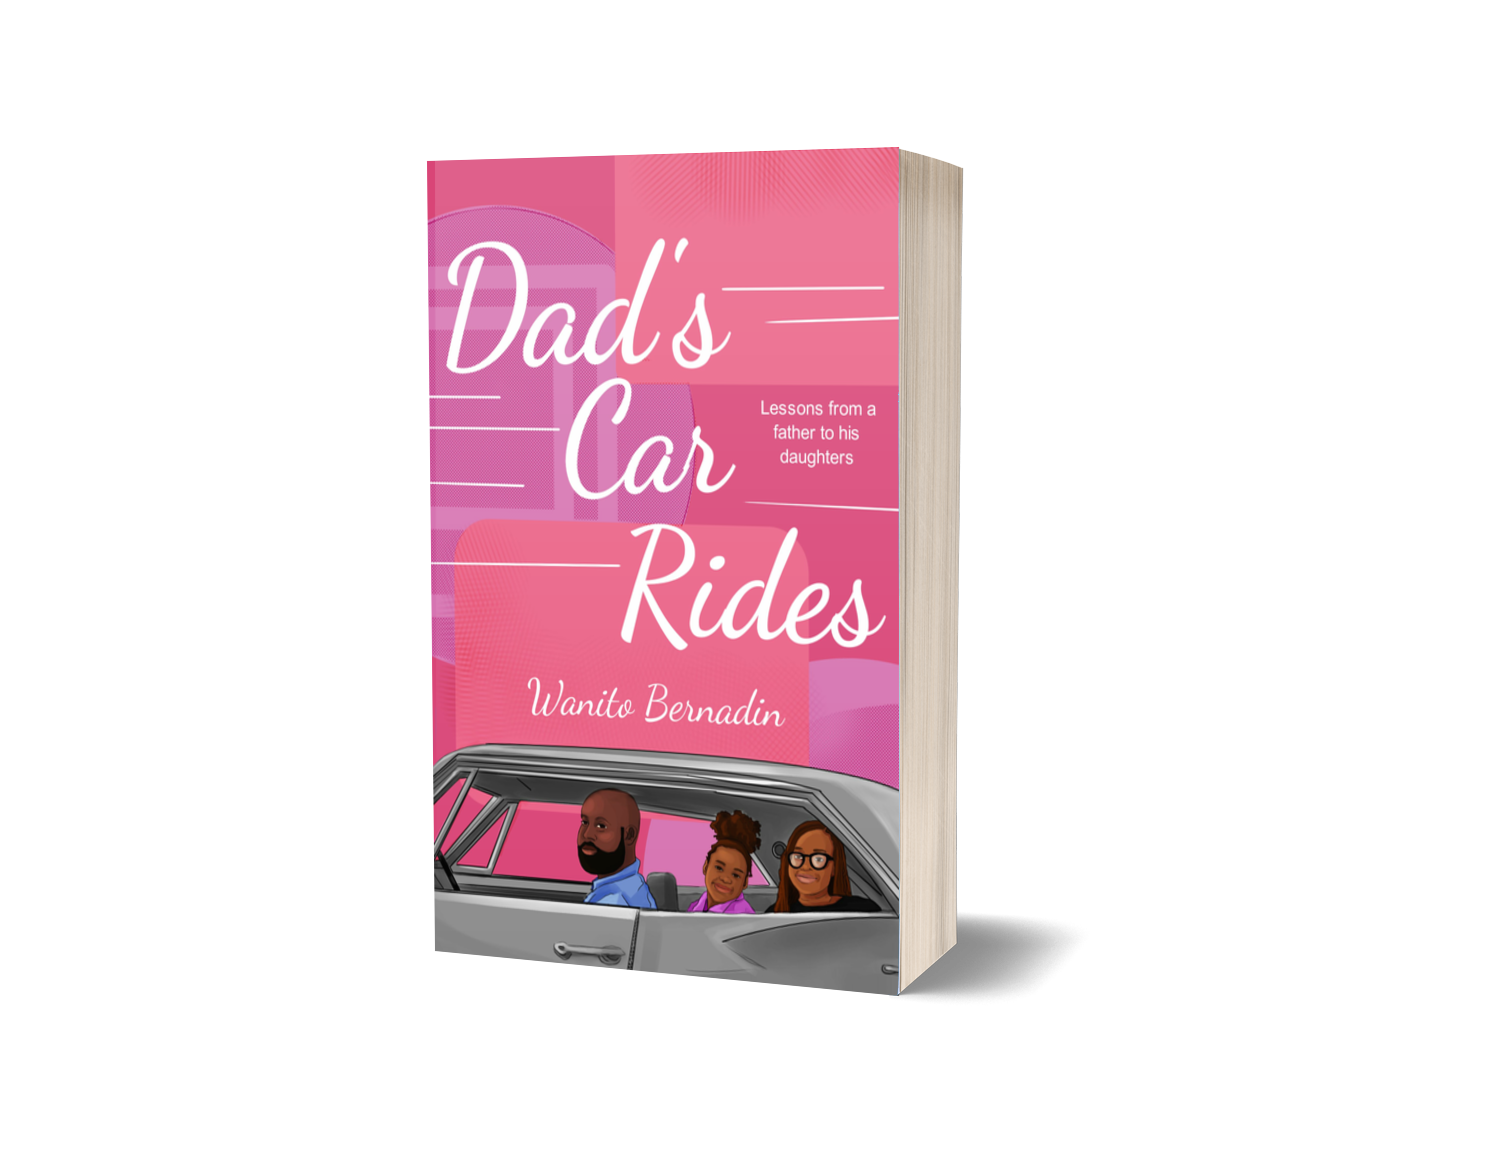 Dad's Car Rides (use the Variants drop list below to choose a book format)